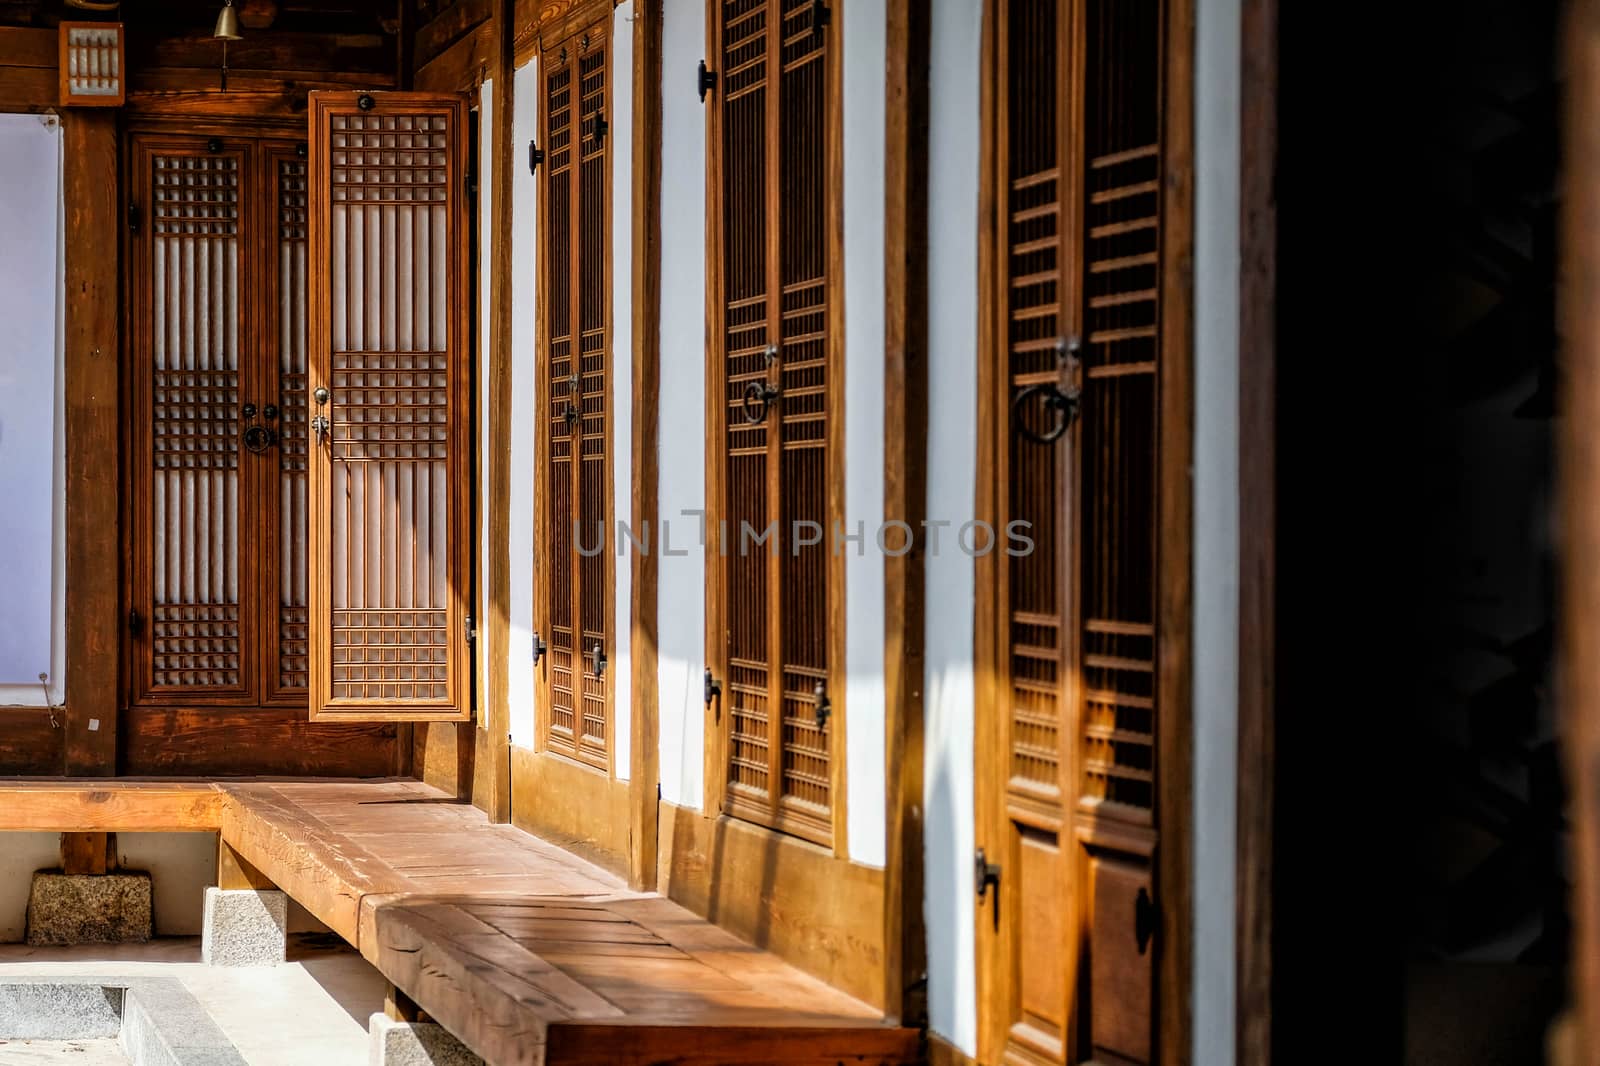 Detail and close up traditional Korean style architecture at Bukchon Hanok Village in Seoul, South Korea.